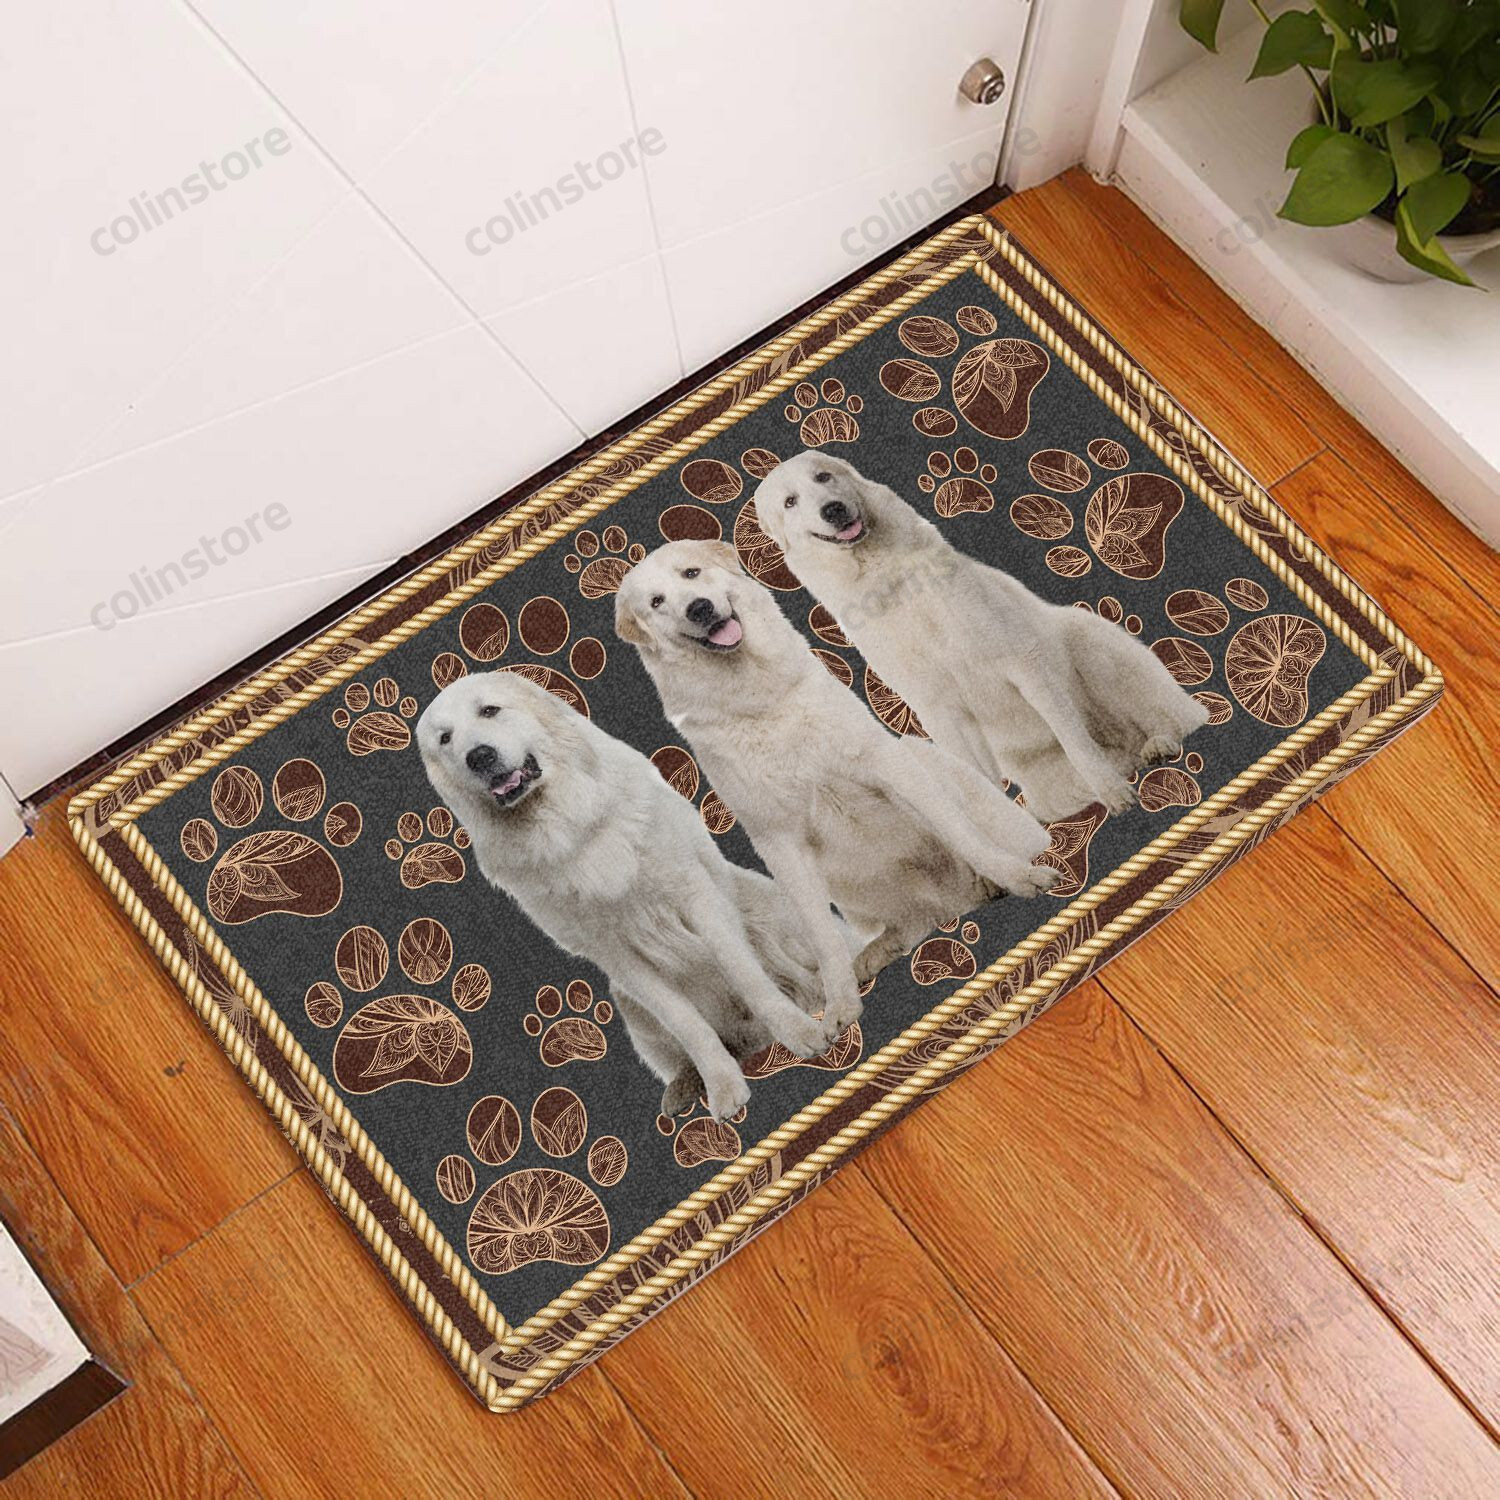 Great Pyrenees Paw Floral - Dog Doormat Welcome Mat